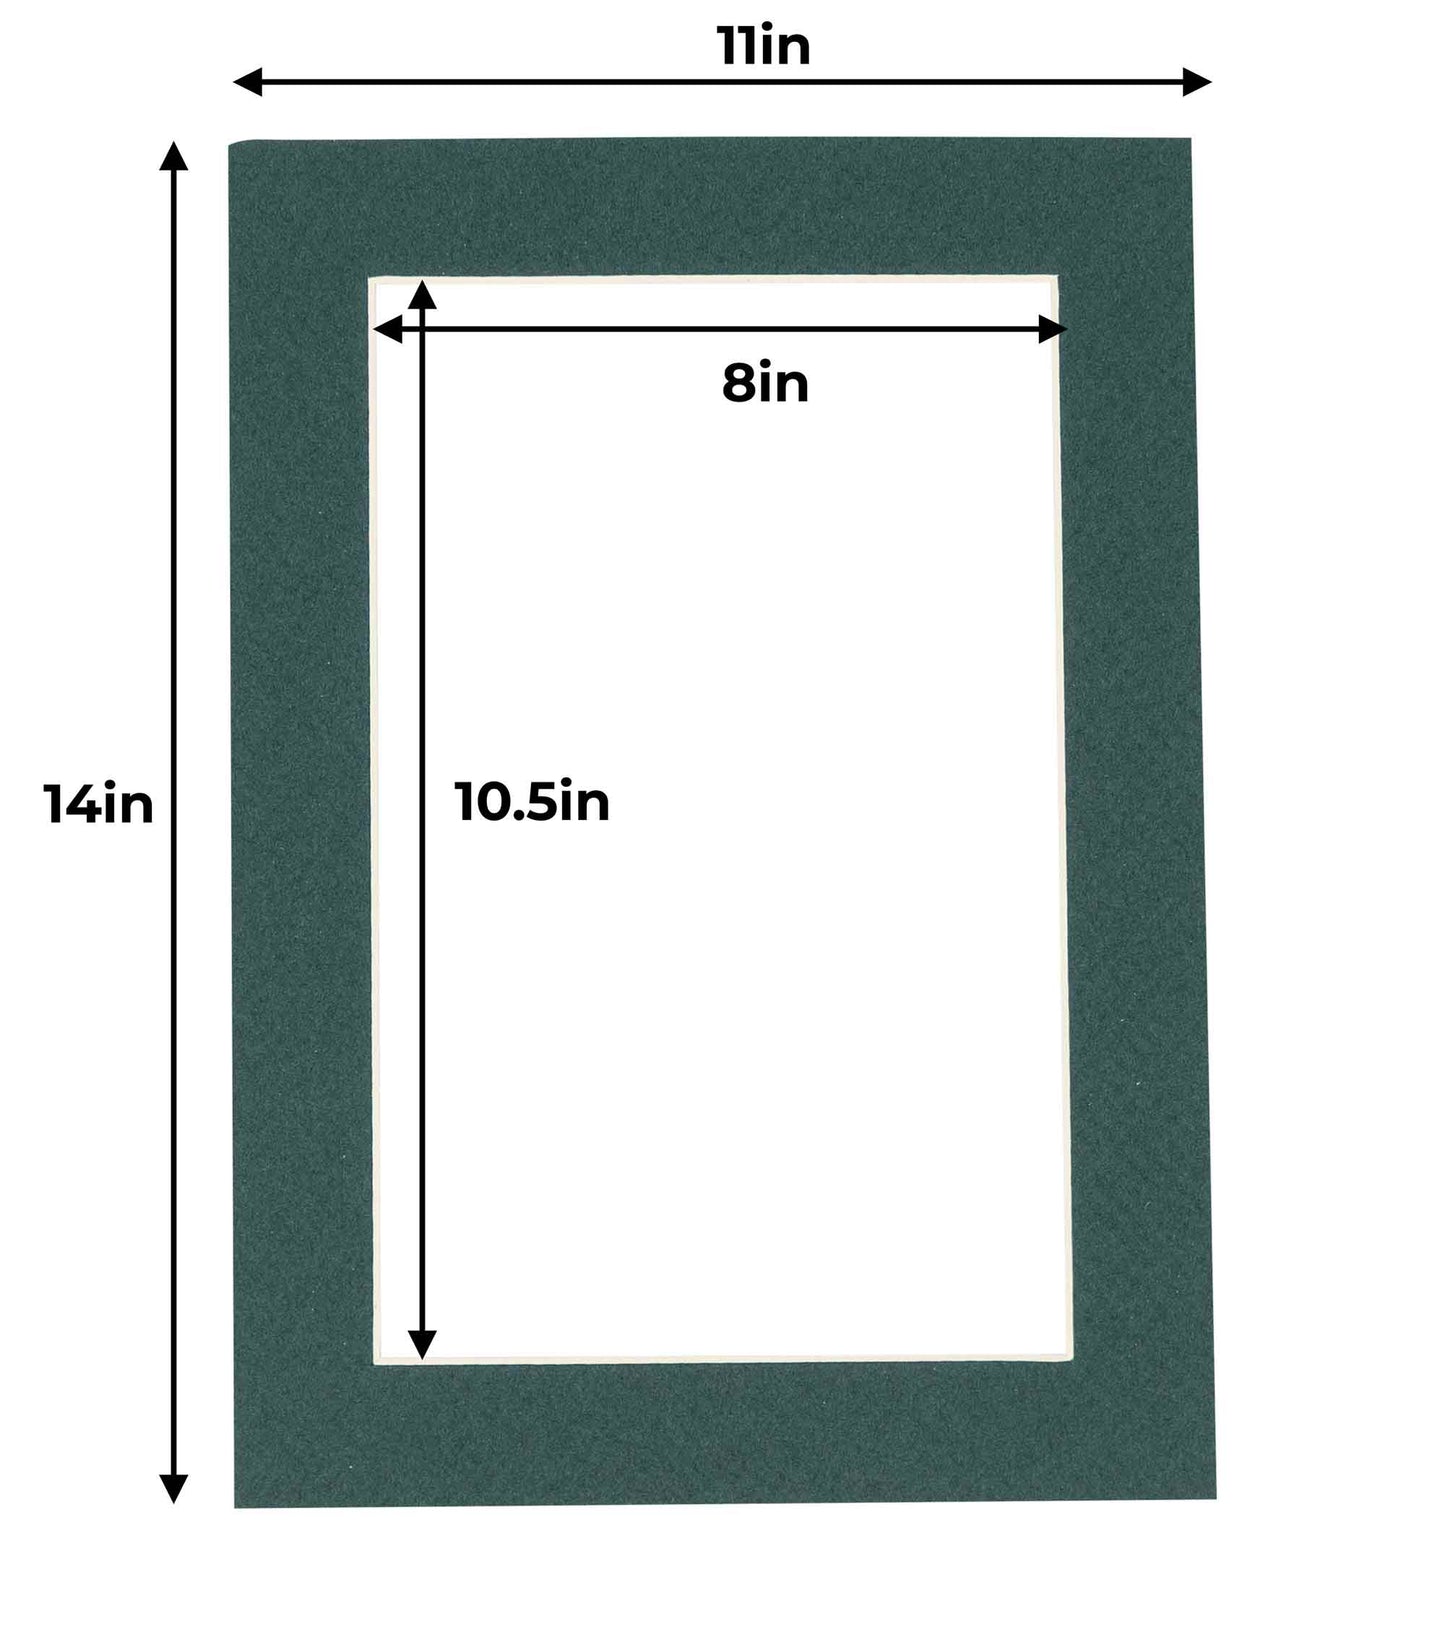 Pack of 10 Forest Green Precut Acid-Free Matboards